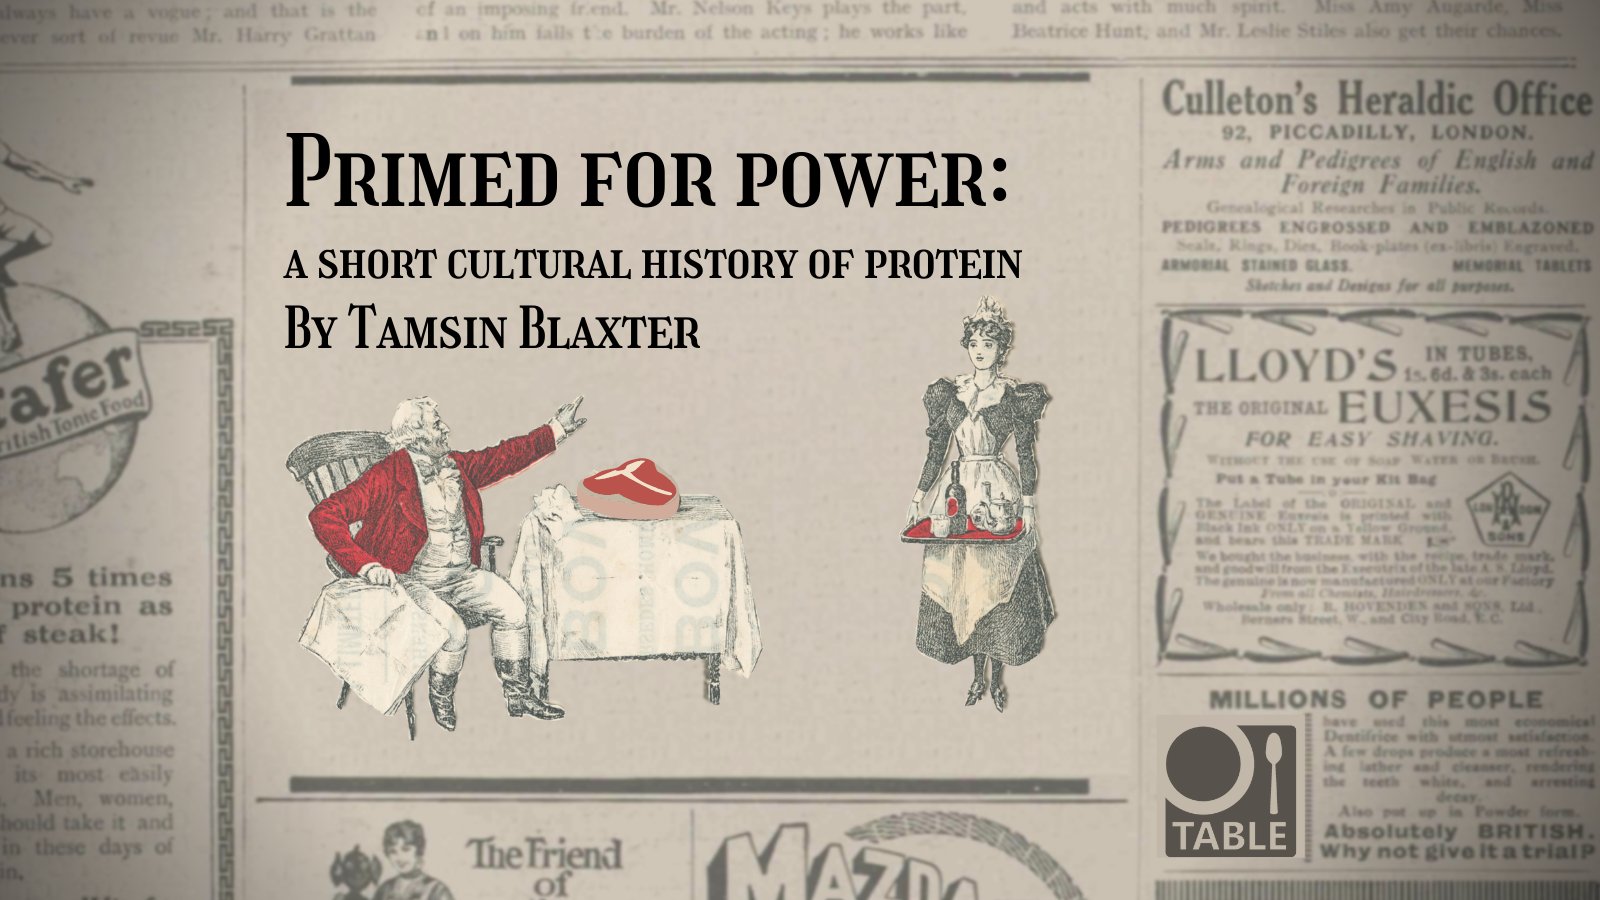 Newspaper image for Primed for Power report